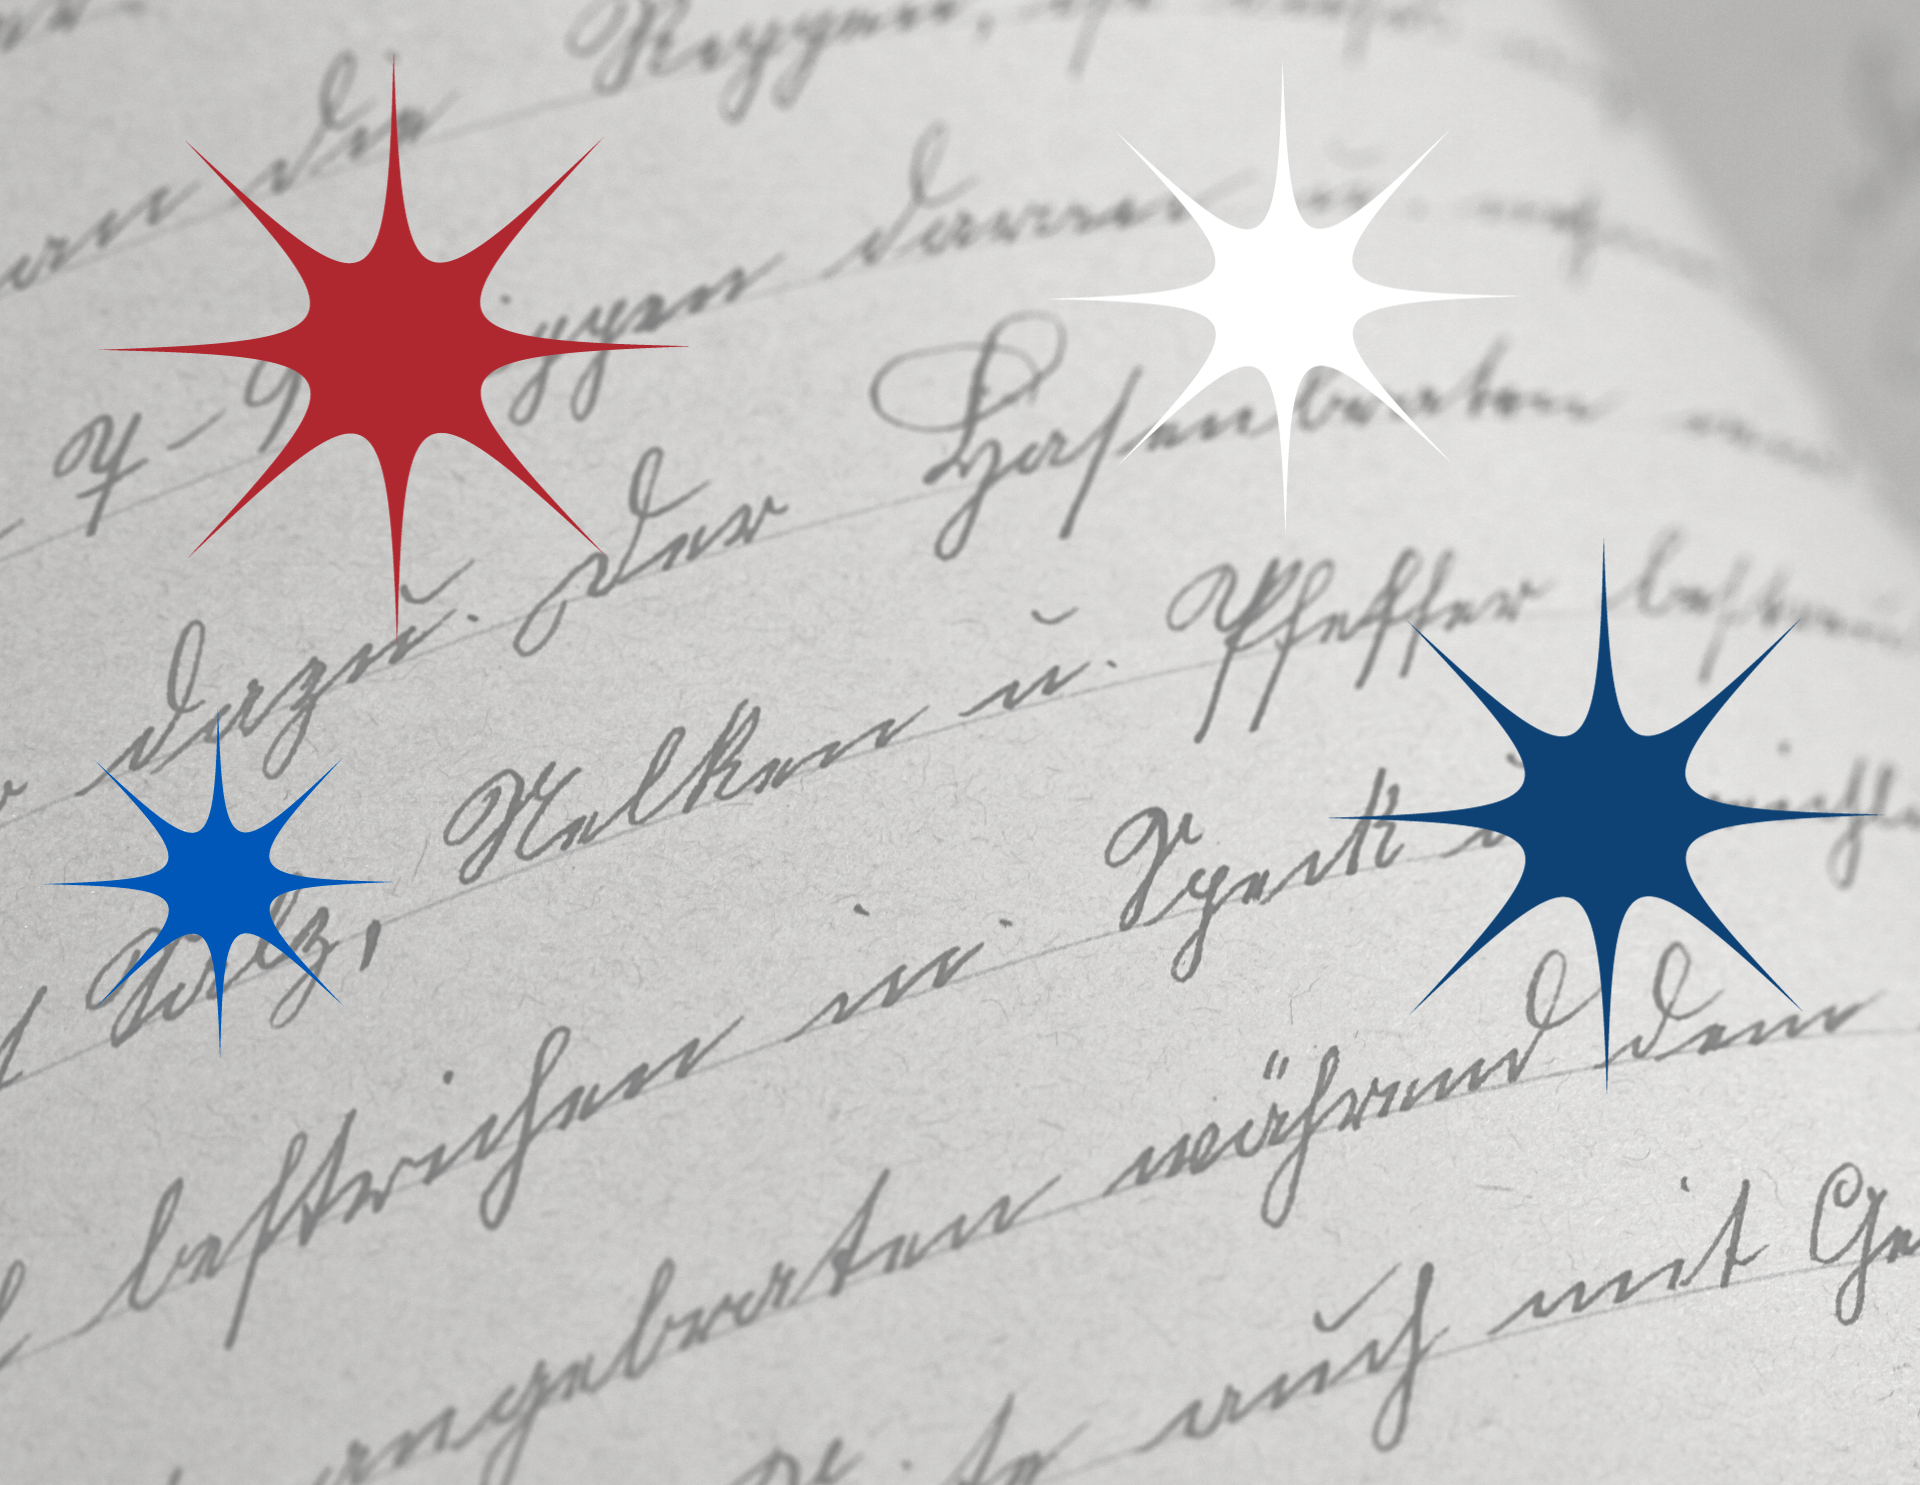 Close up image of cursive writing in a notebook. Blue, red, and white stars with 8 points are scattered across the notebook